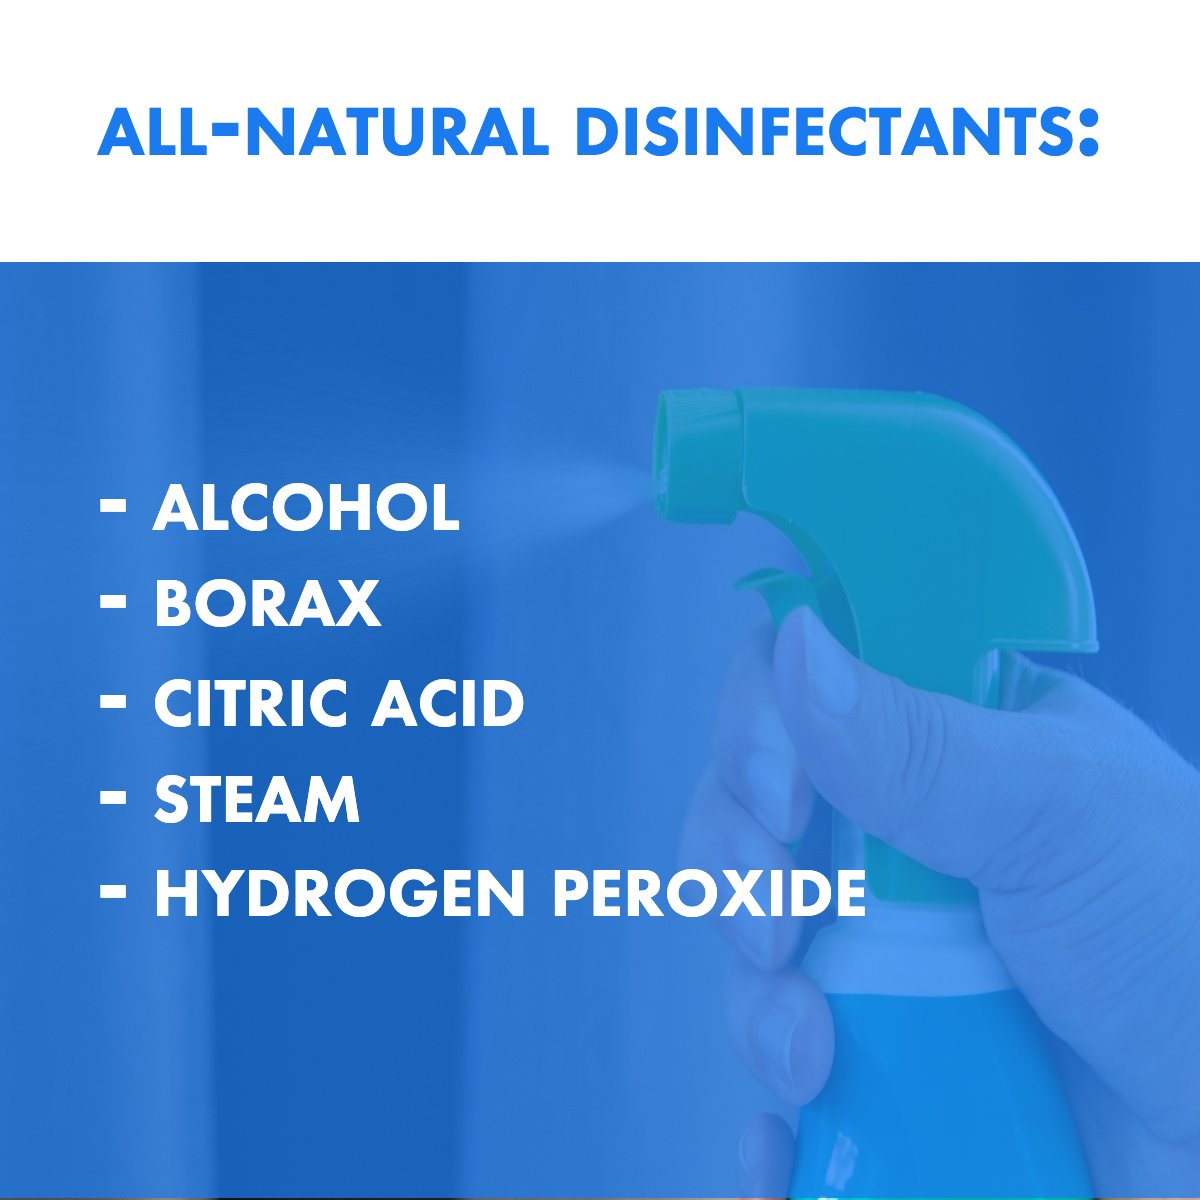 Do you know any all-natural disinfectants?

Leave us below the best all-natural disinfectants you have tested out! 👇

#Cleaningfacts    #Facts    #cleaning    #natural 

#schy #schyrealtor #Realestateinvesting #fresno #fresnorealestate #buyrealestate